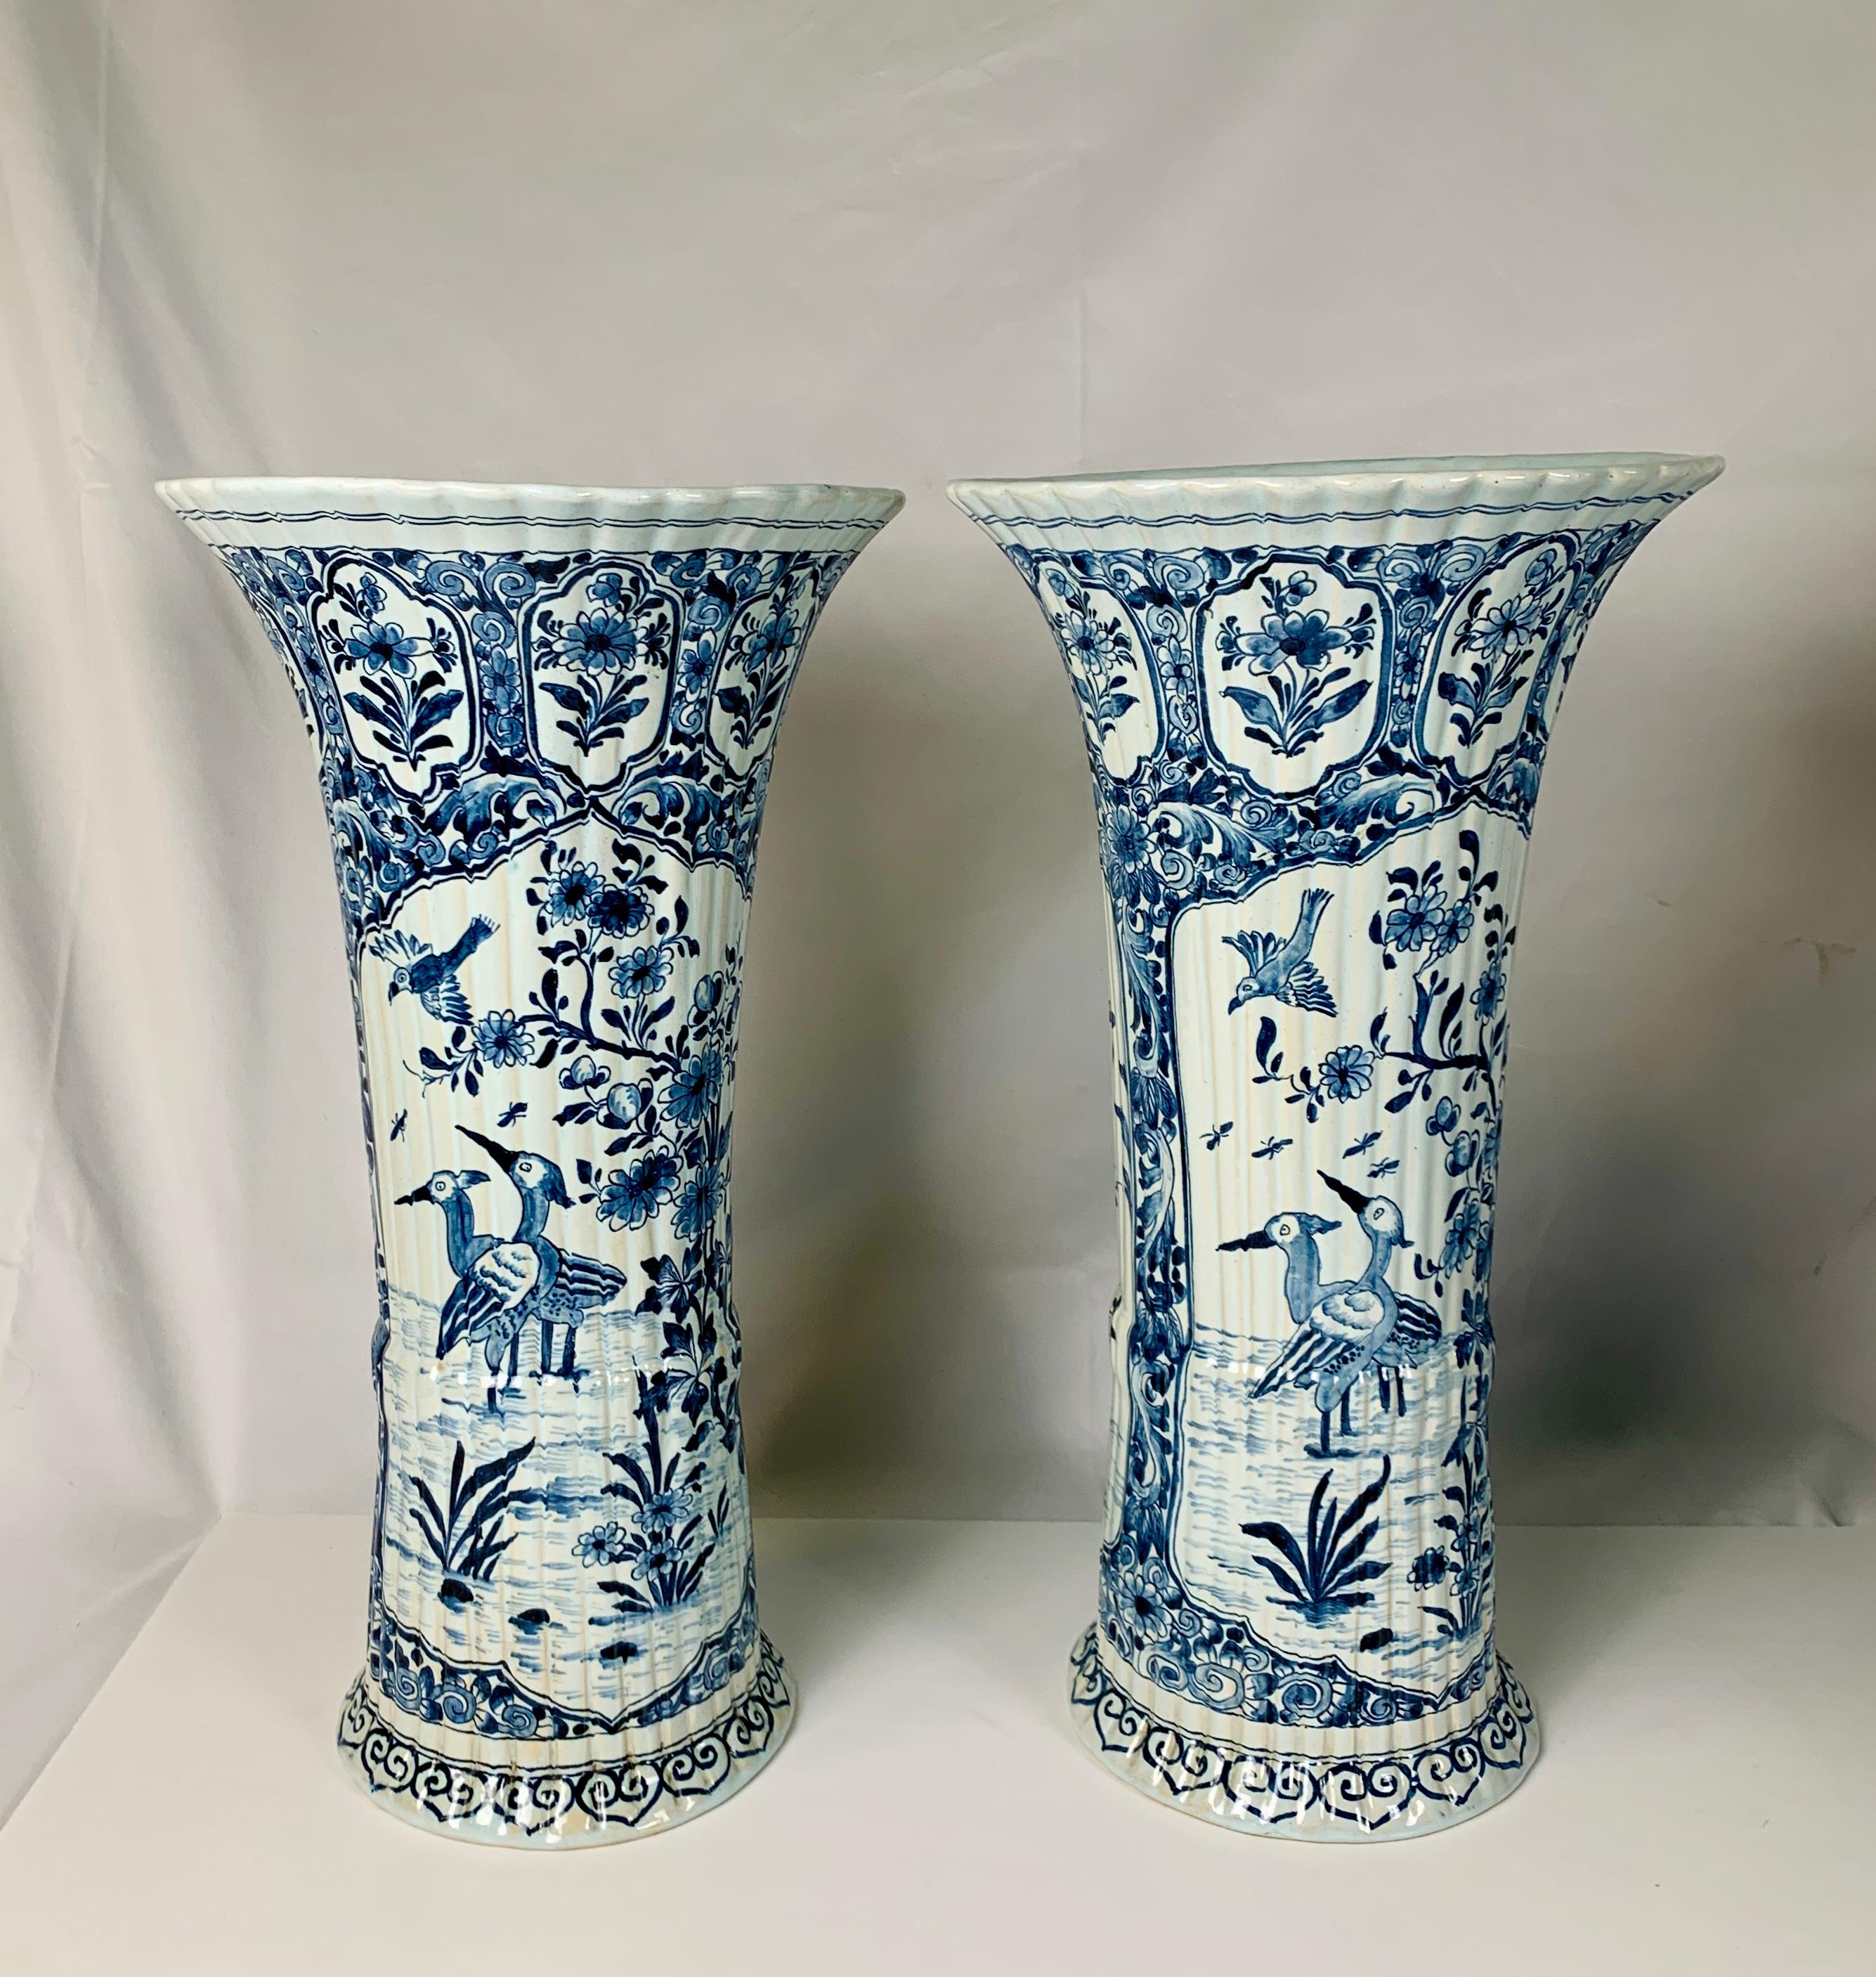 A Group of Dutch Delft jars and open vases late 18th to 20th centuries
The price for the group is $10,700
A] in the center front, a pair of Dutch Delft mantle vases with leopard finials made circa 1850, condition: tiny edge frits, 
13.5